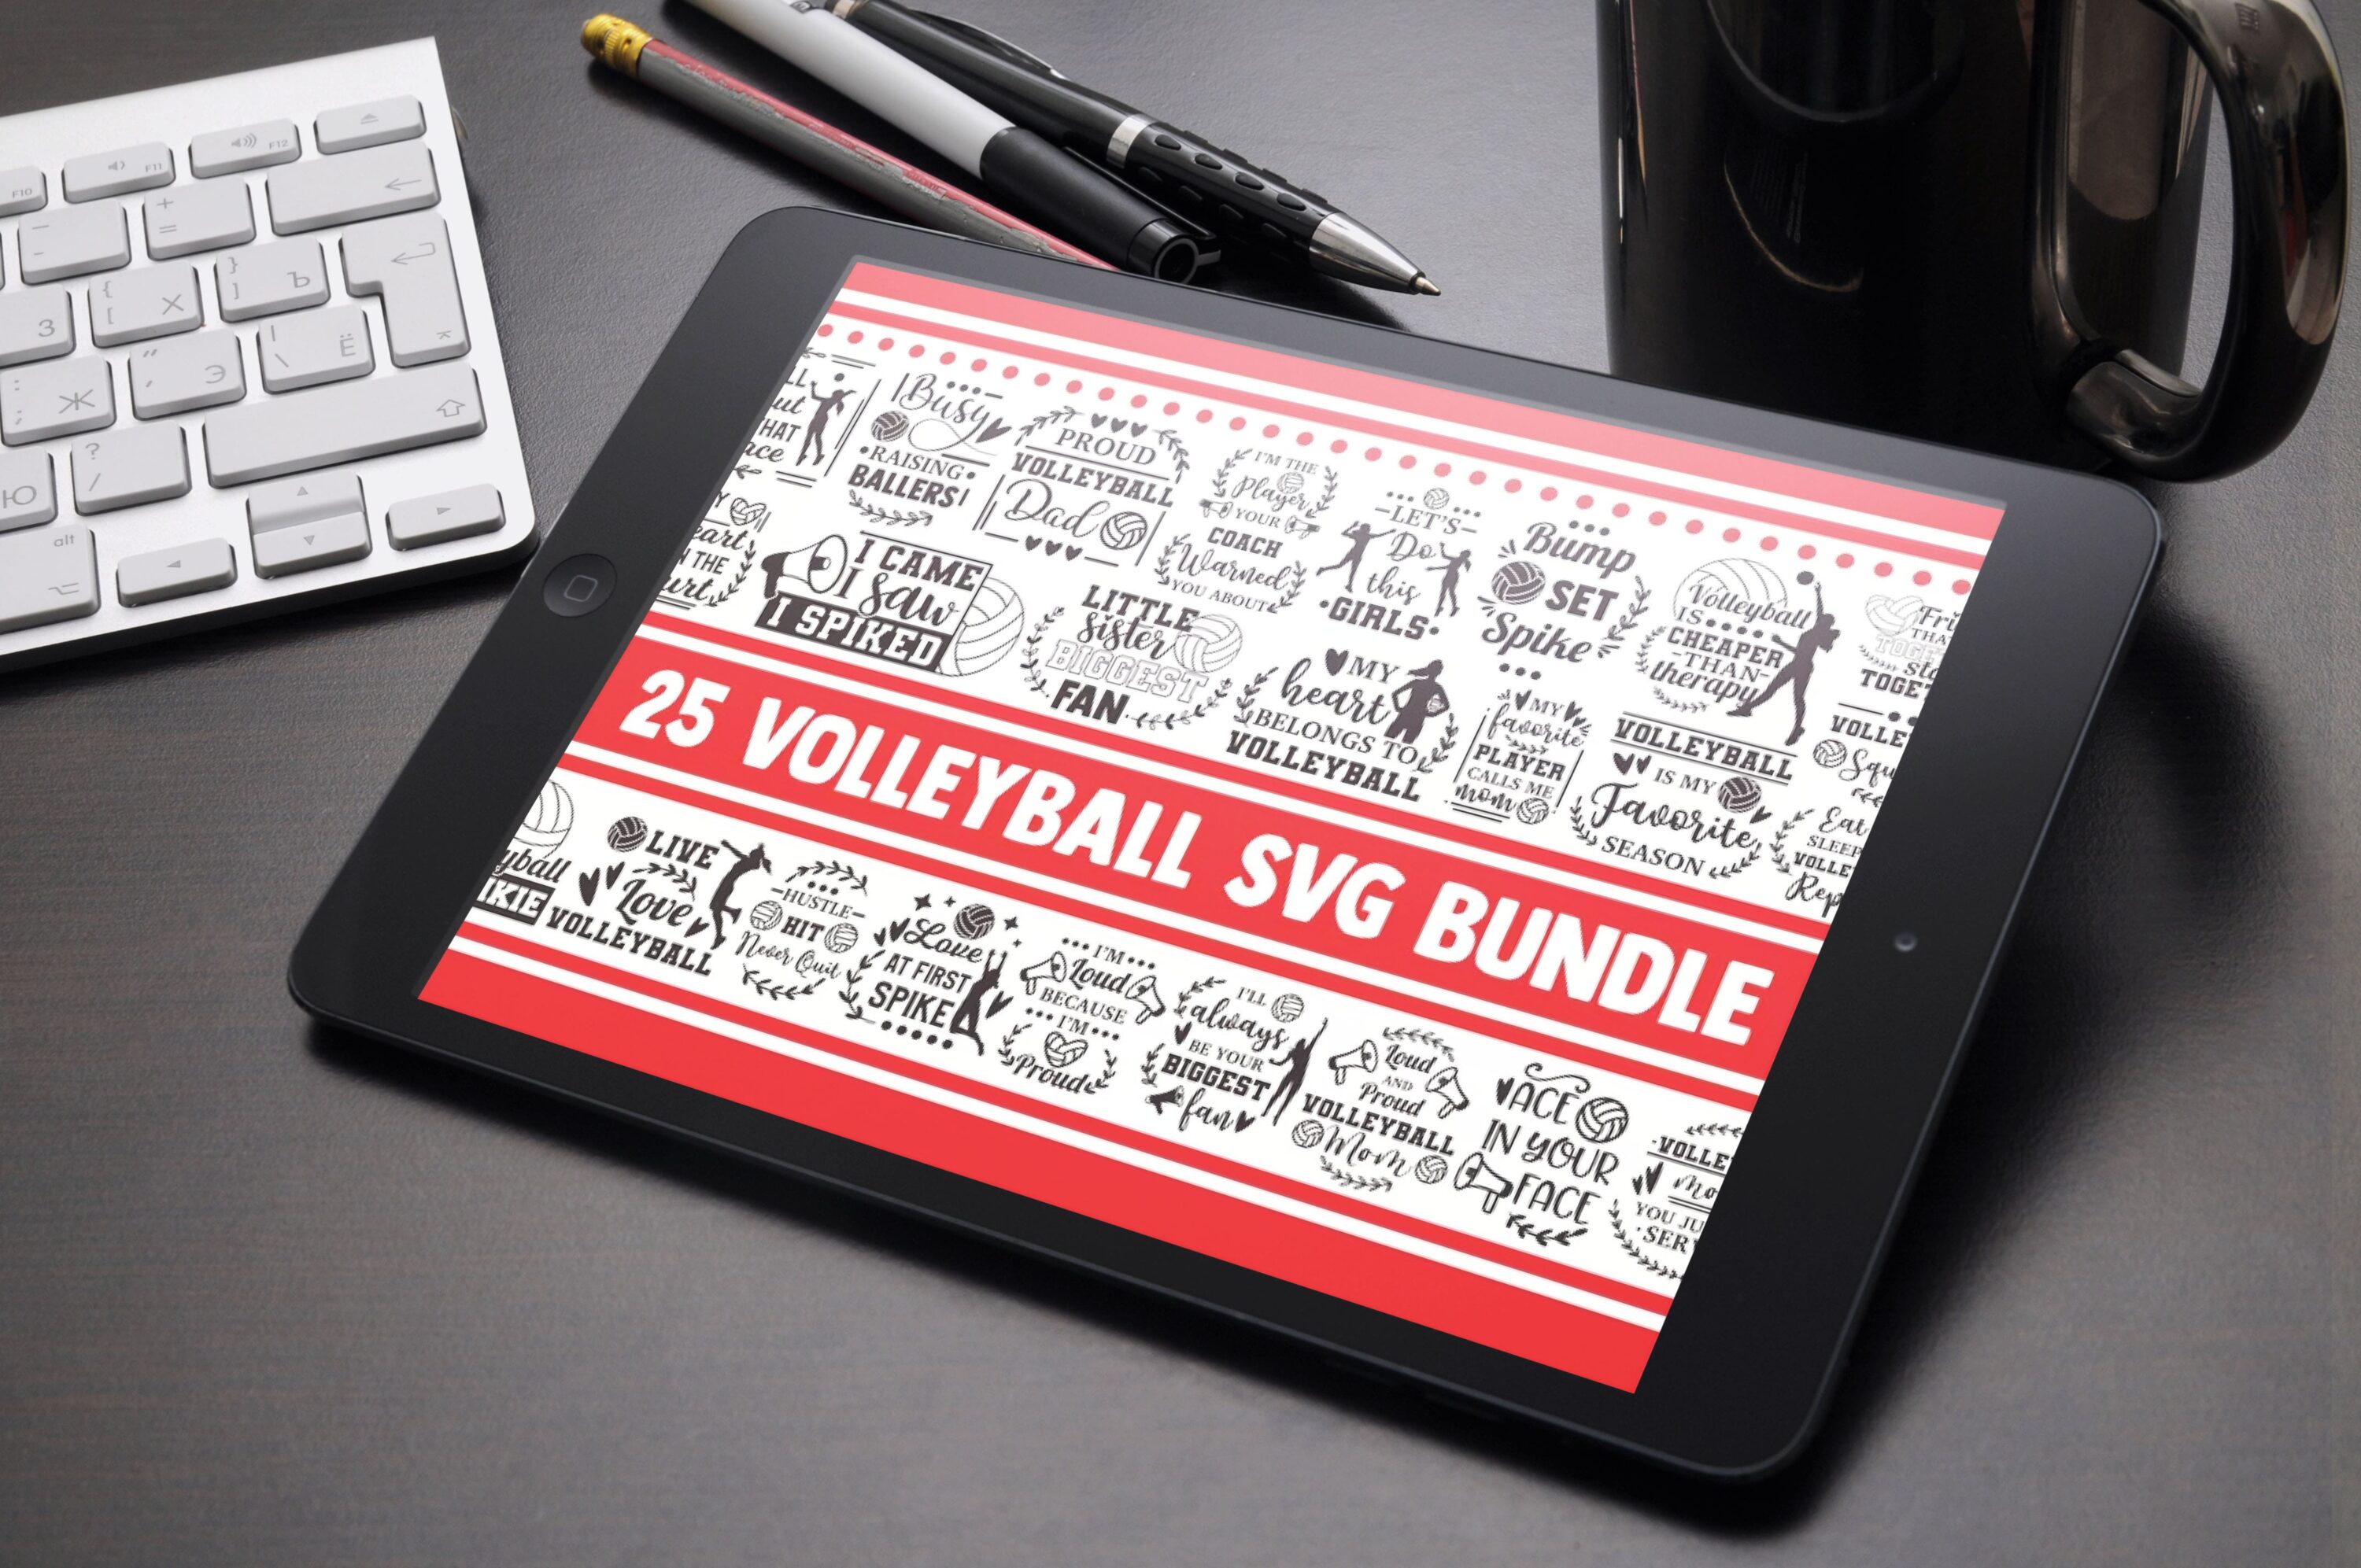 Volleyball svg bundle - tablet preview.